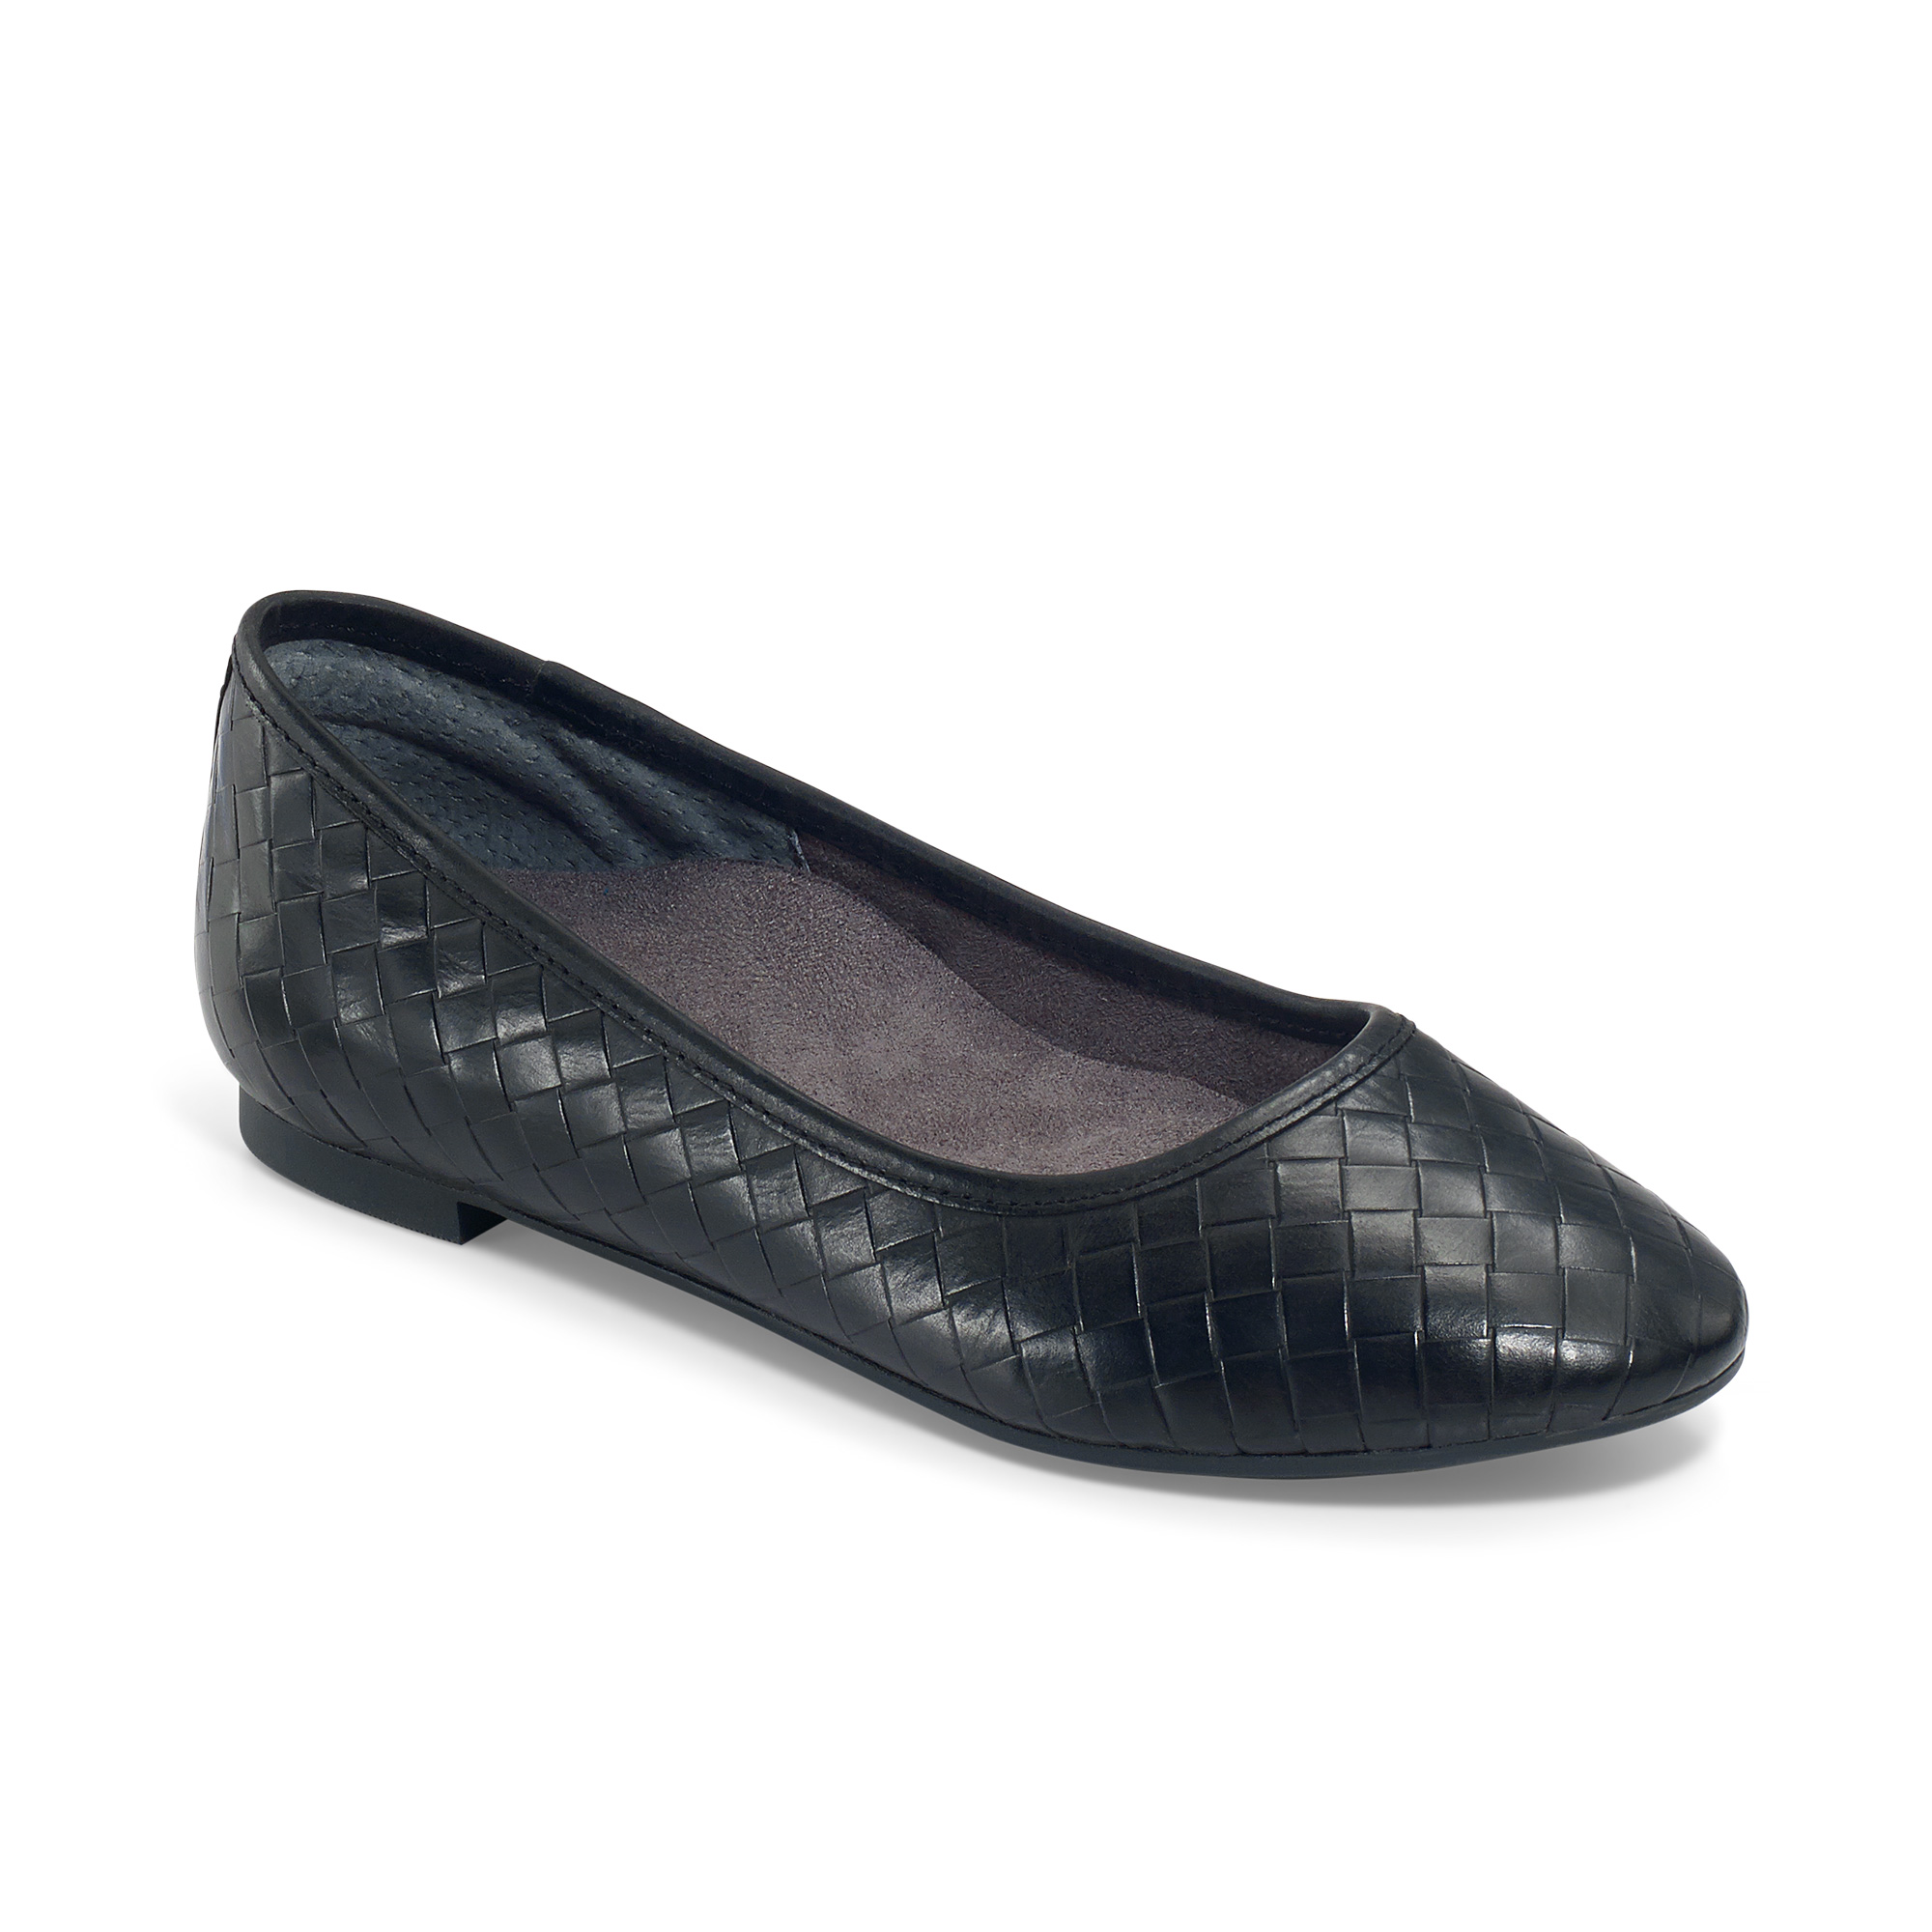 flat black shoes with arch support